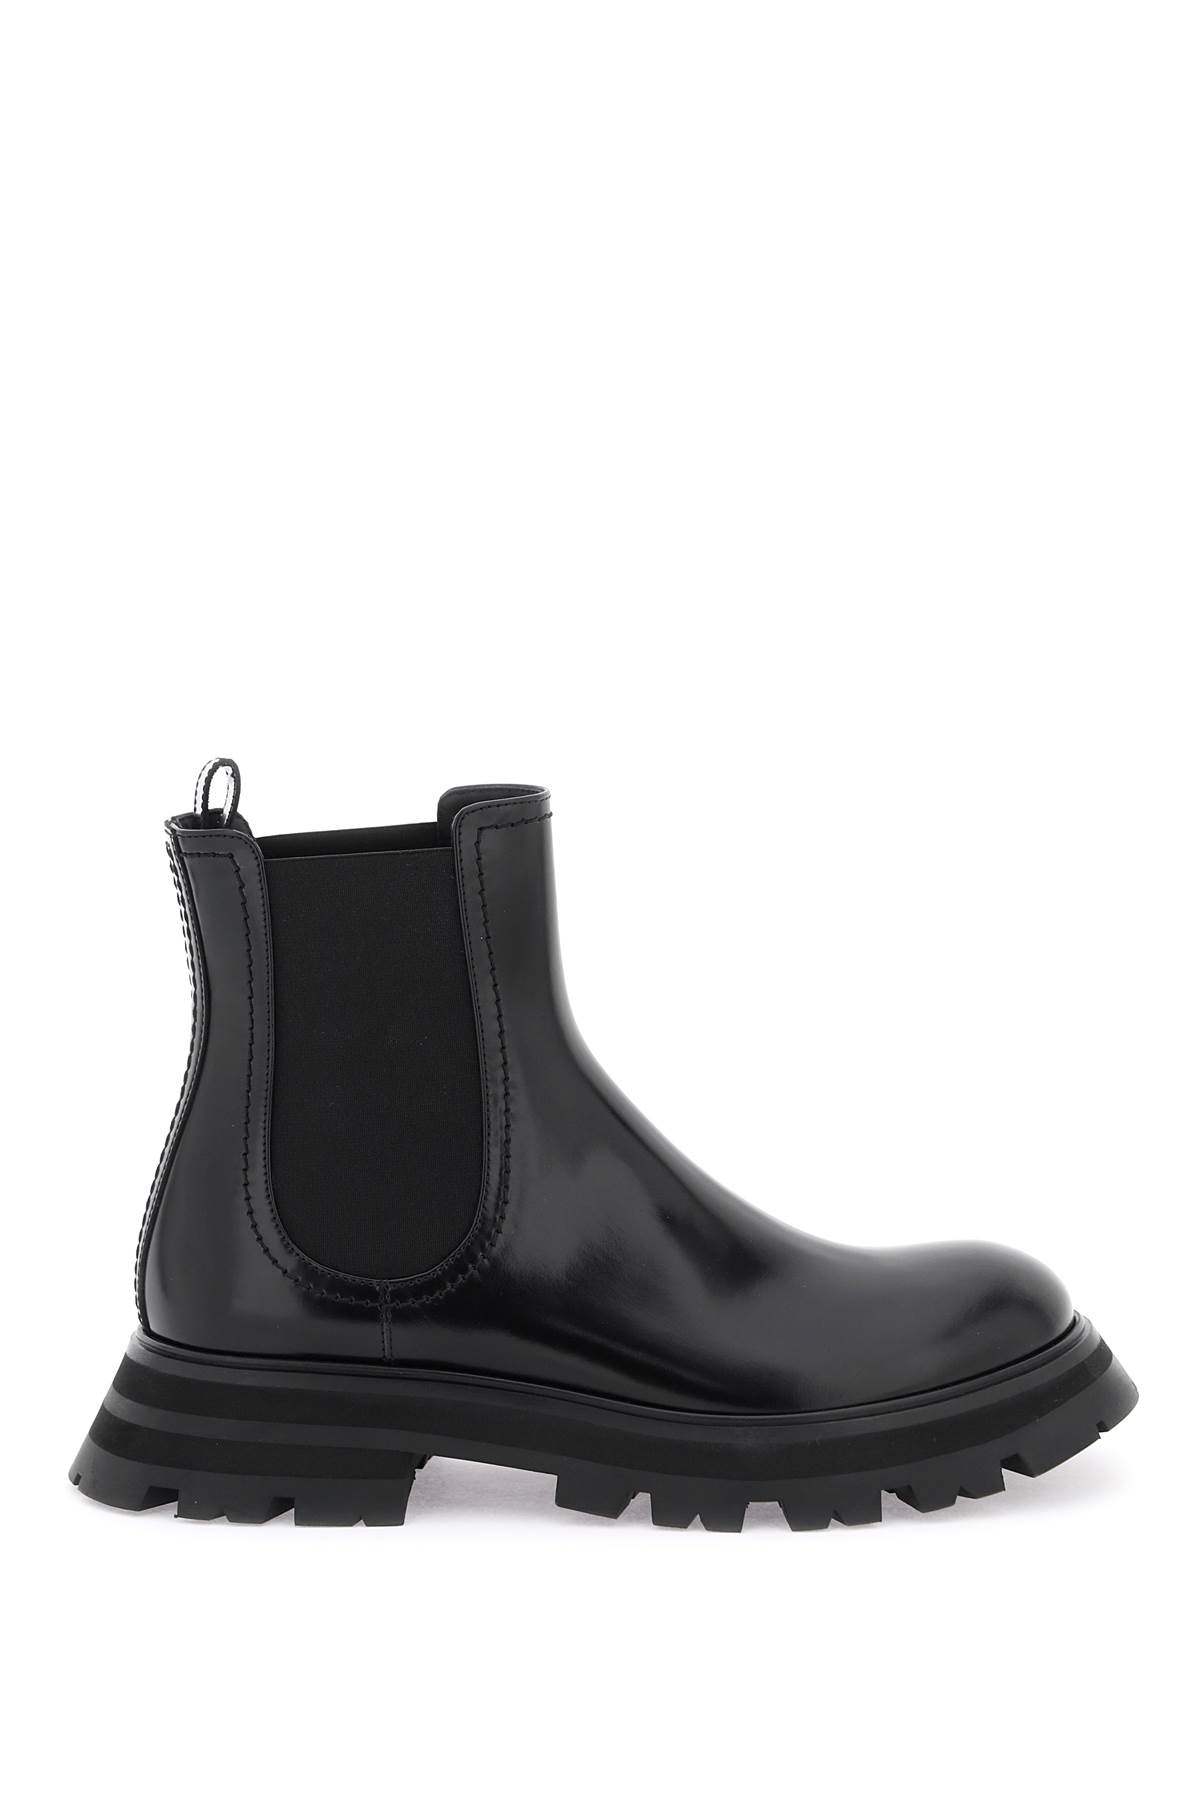 Alexander McQUEEN Shiny Leather Chelsea Boots Black